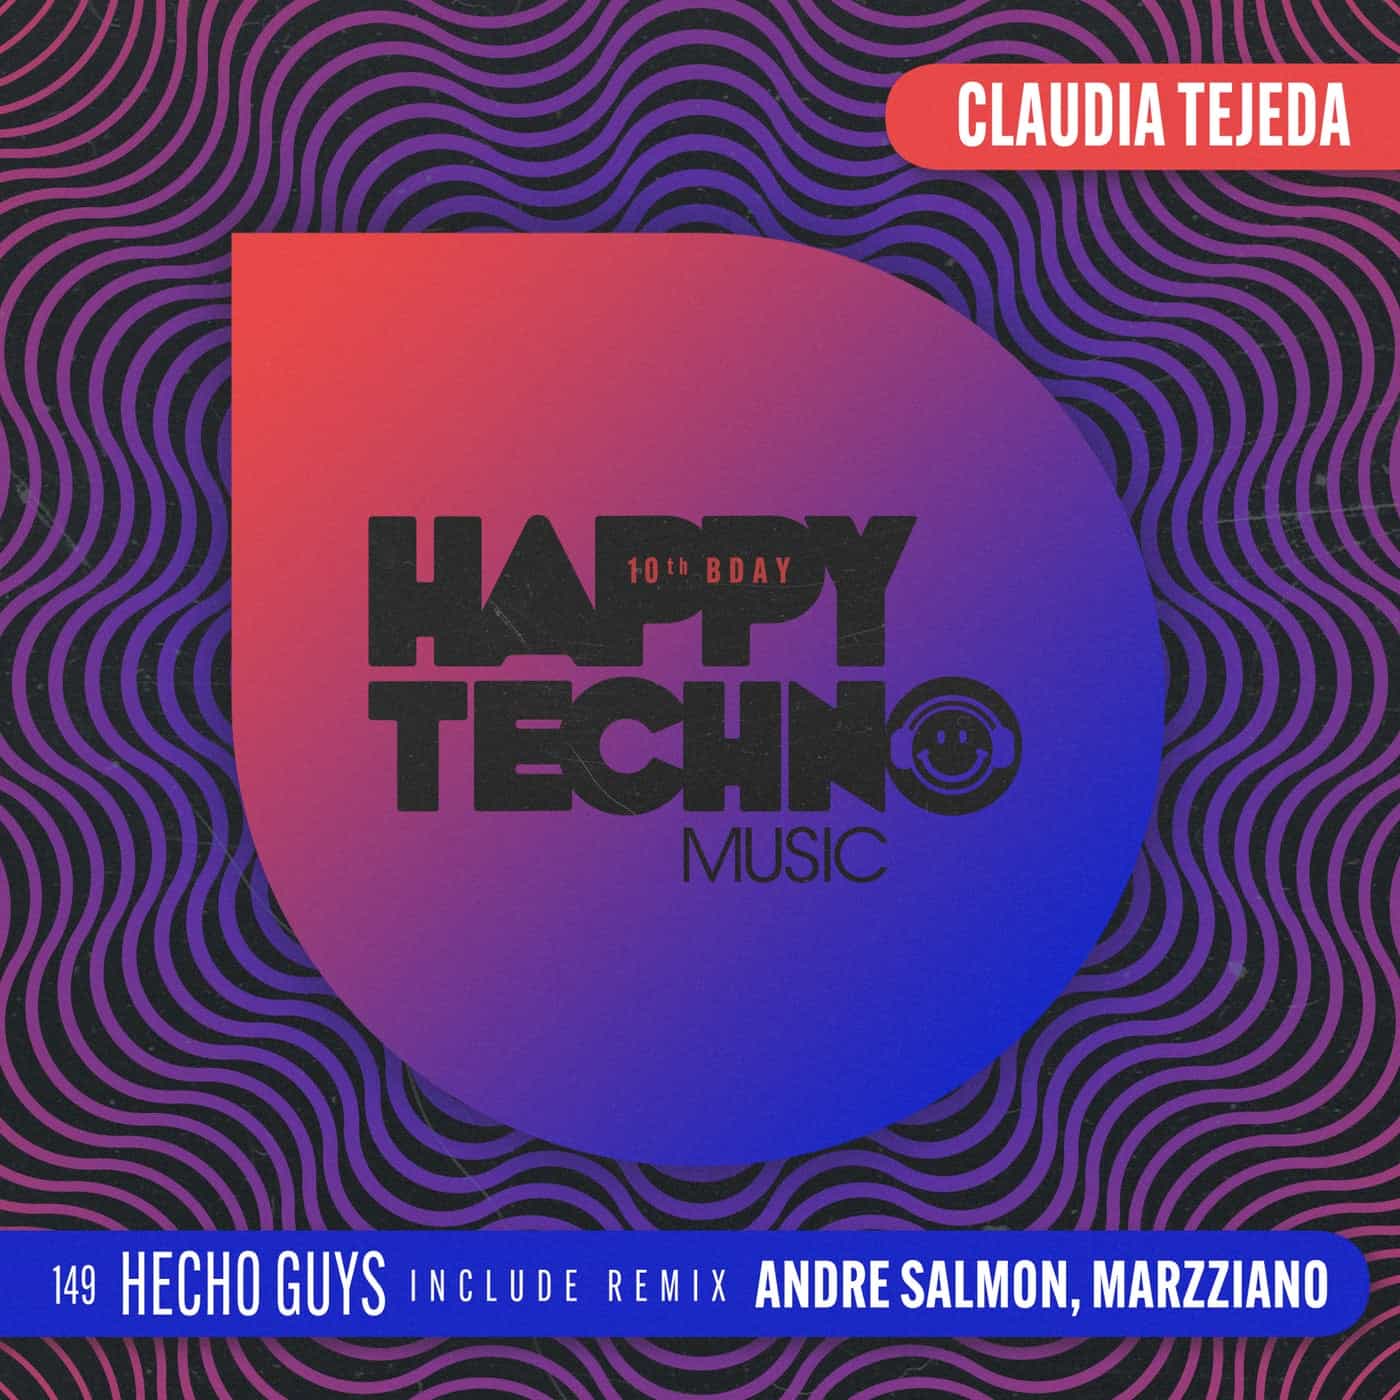 Download Hecho Guys on Electrobuzz